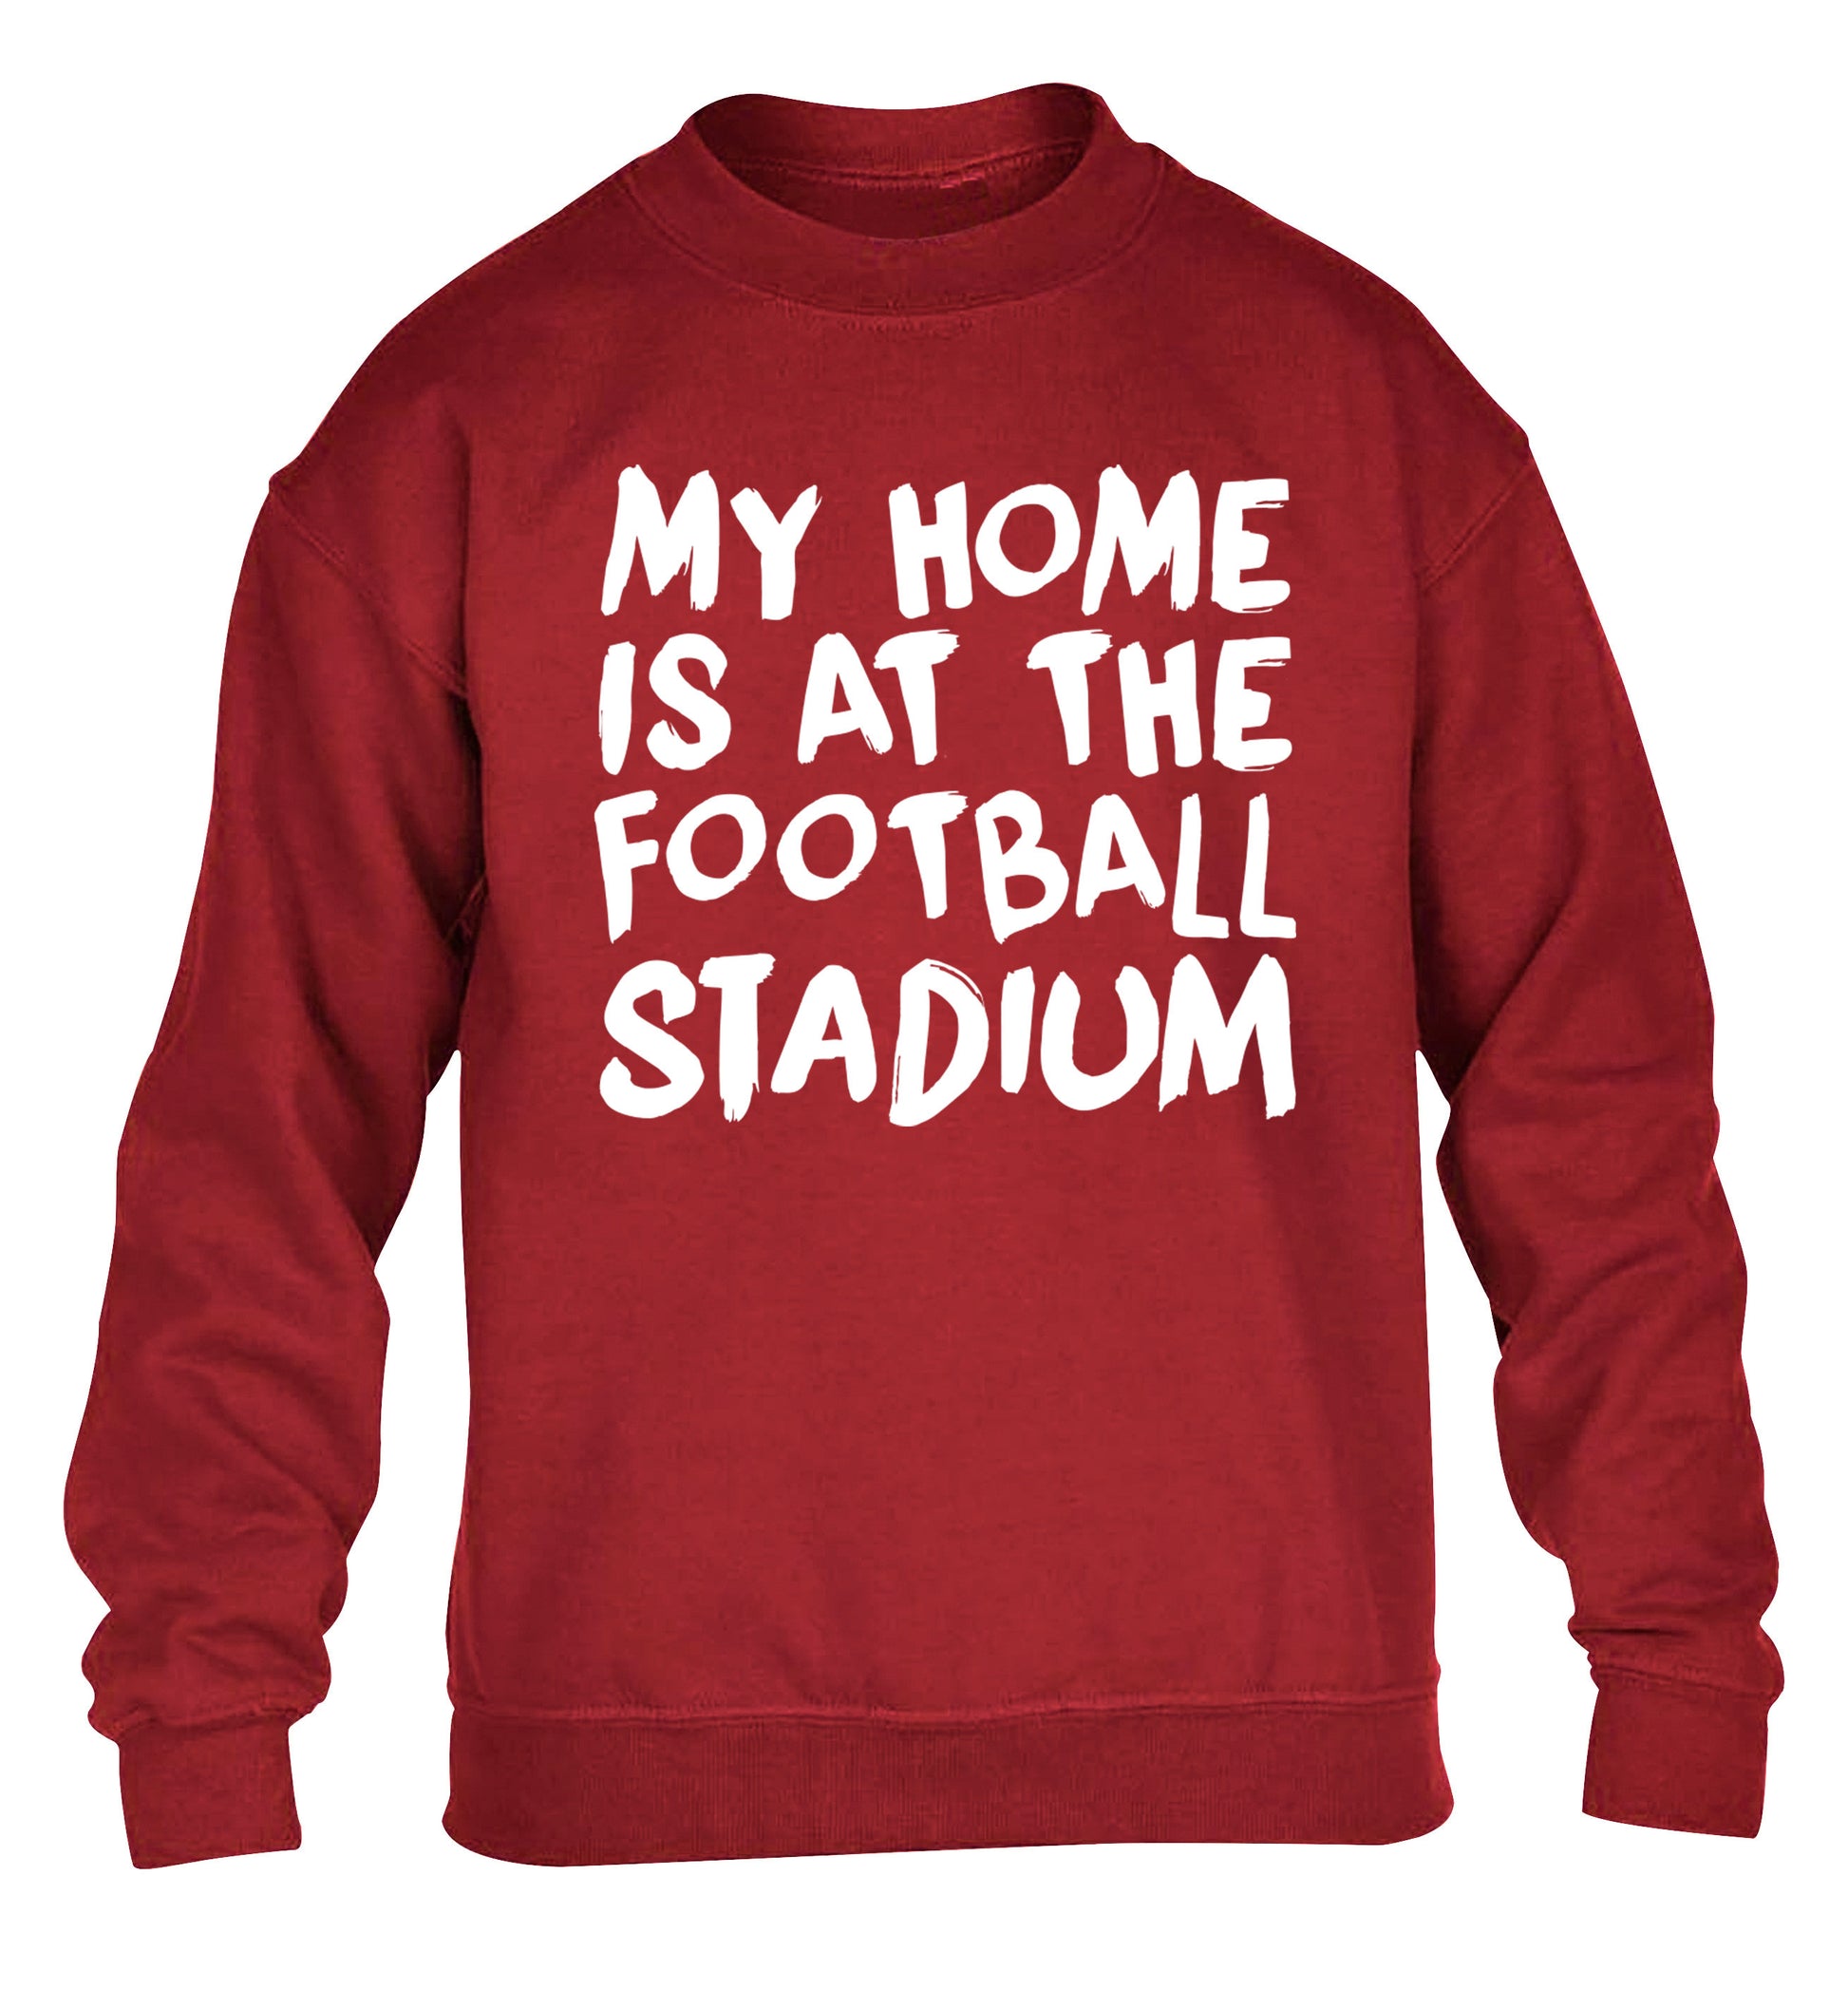 My home is at the football stadium children's grey sweater 12-14 Years